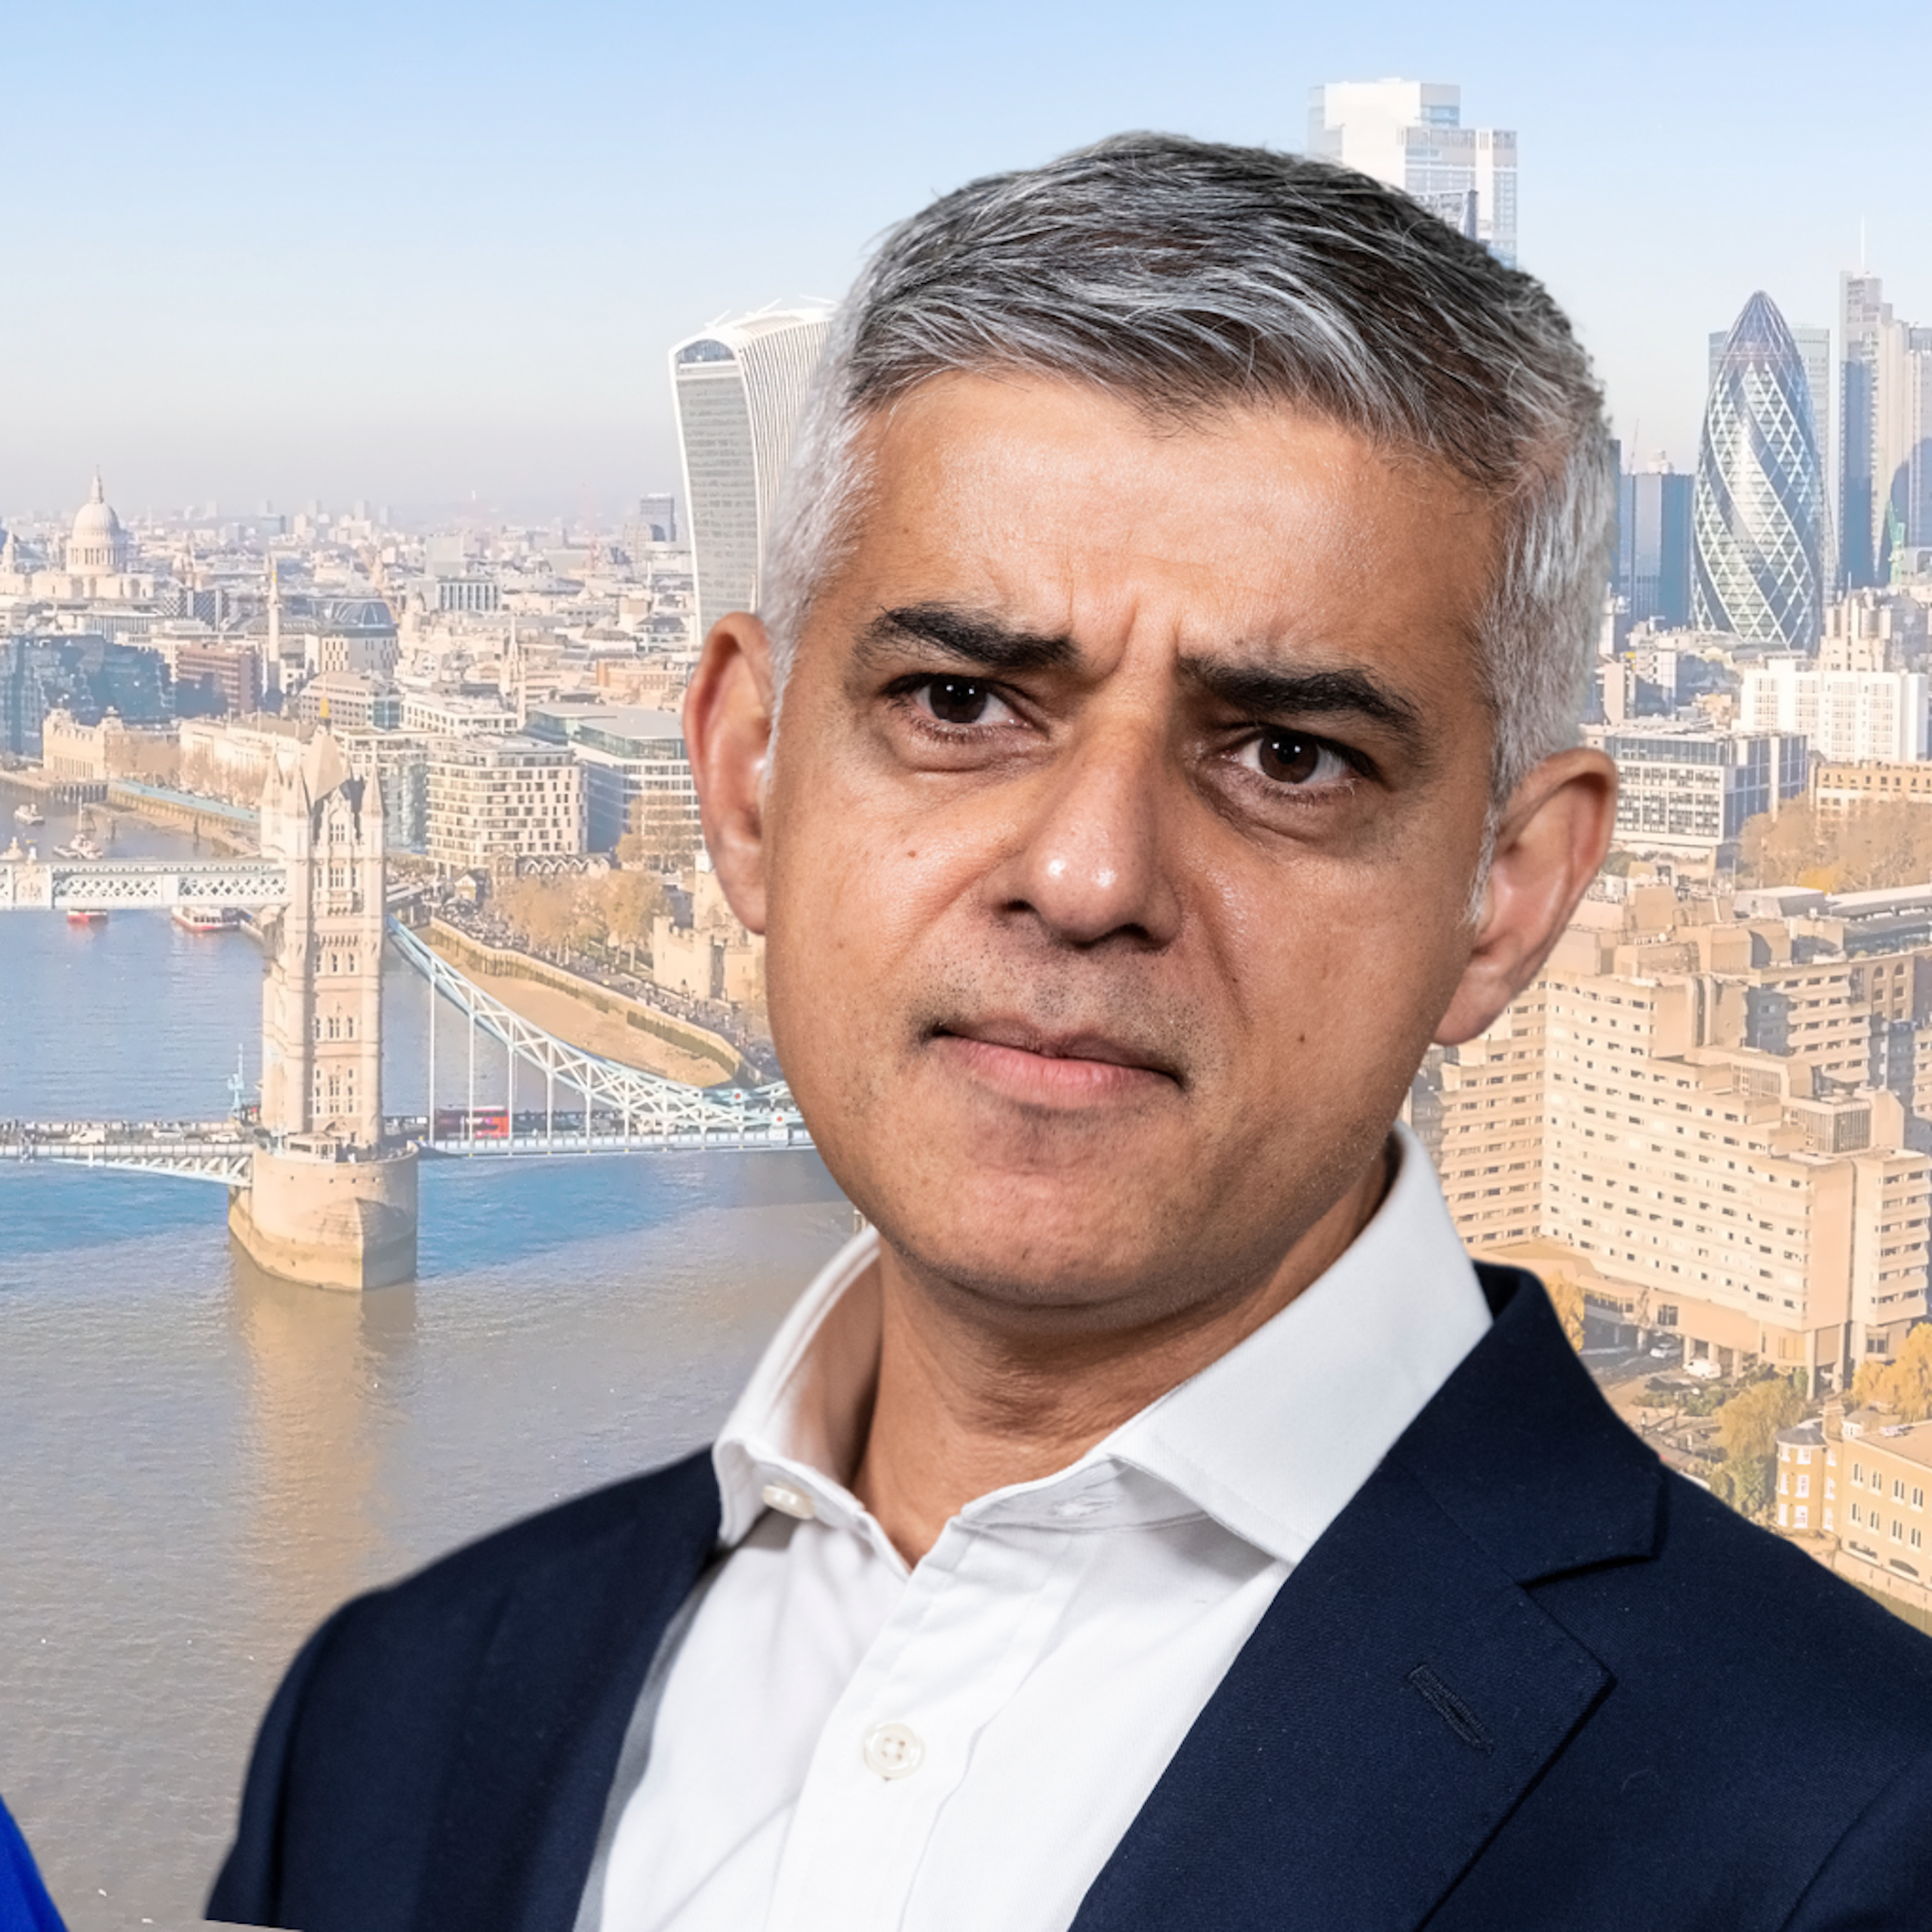 Collage of Susan Hall and Sadiq Khan facing each other with an aerial view of London in the background